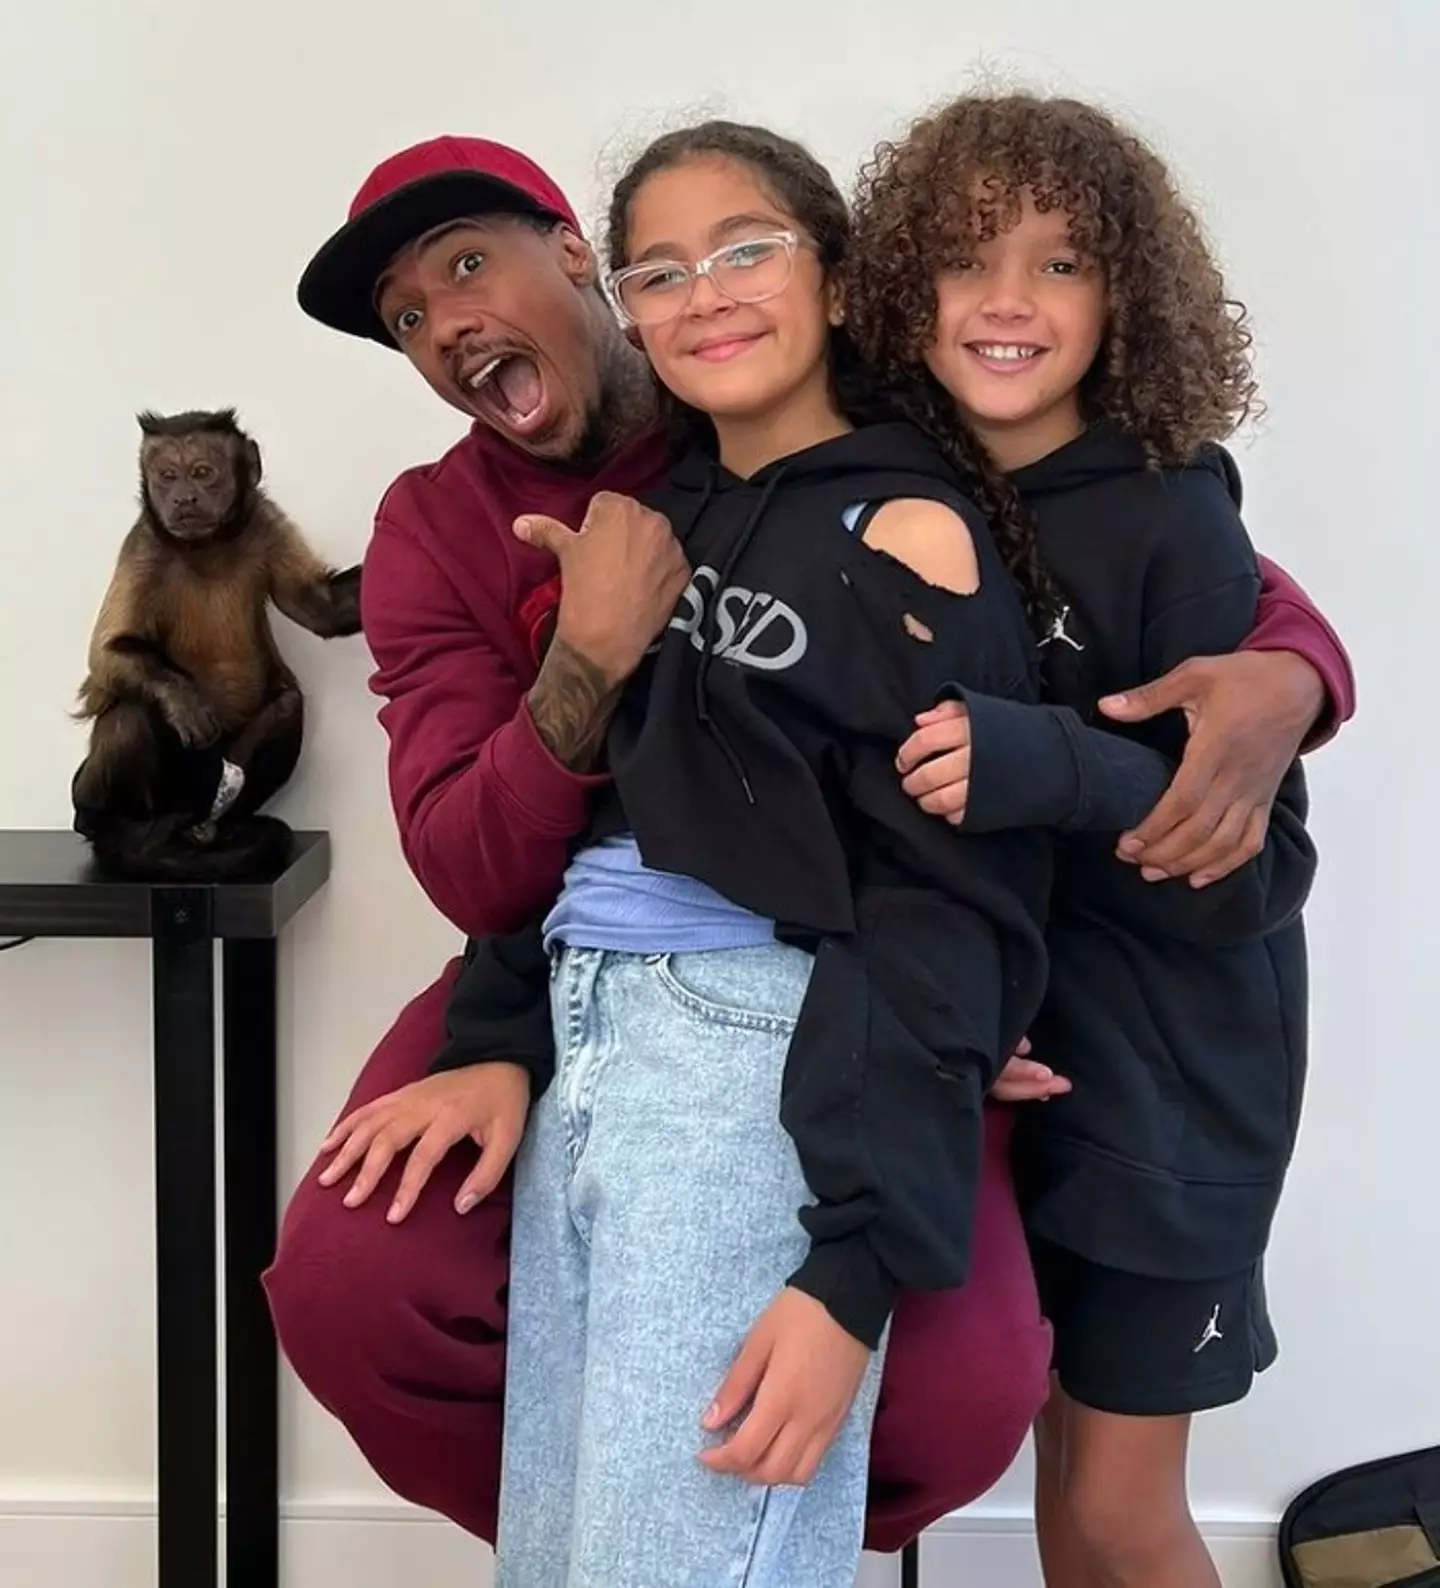 Cannon pictured with his 11-year-old twins Moroccan and Monroe, who he shares with ex-wife Mariah Carey.